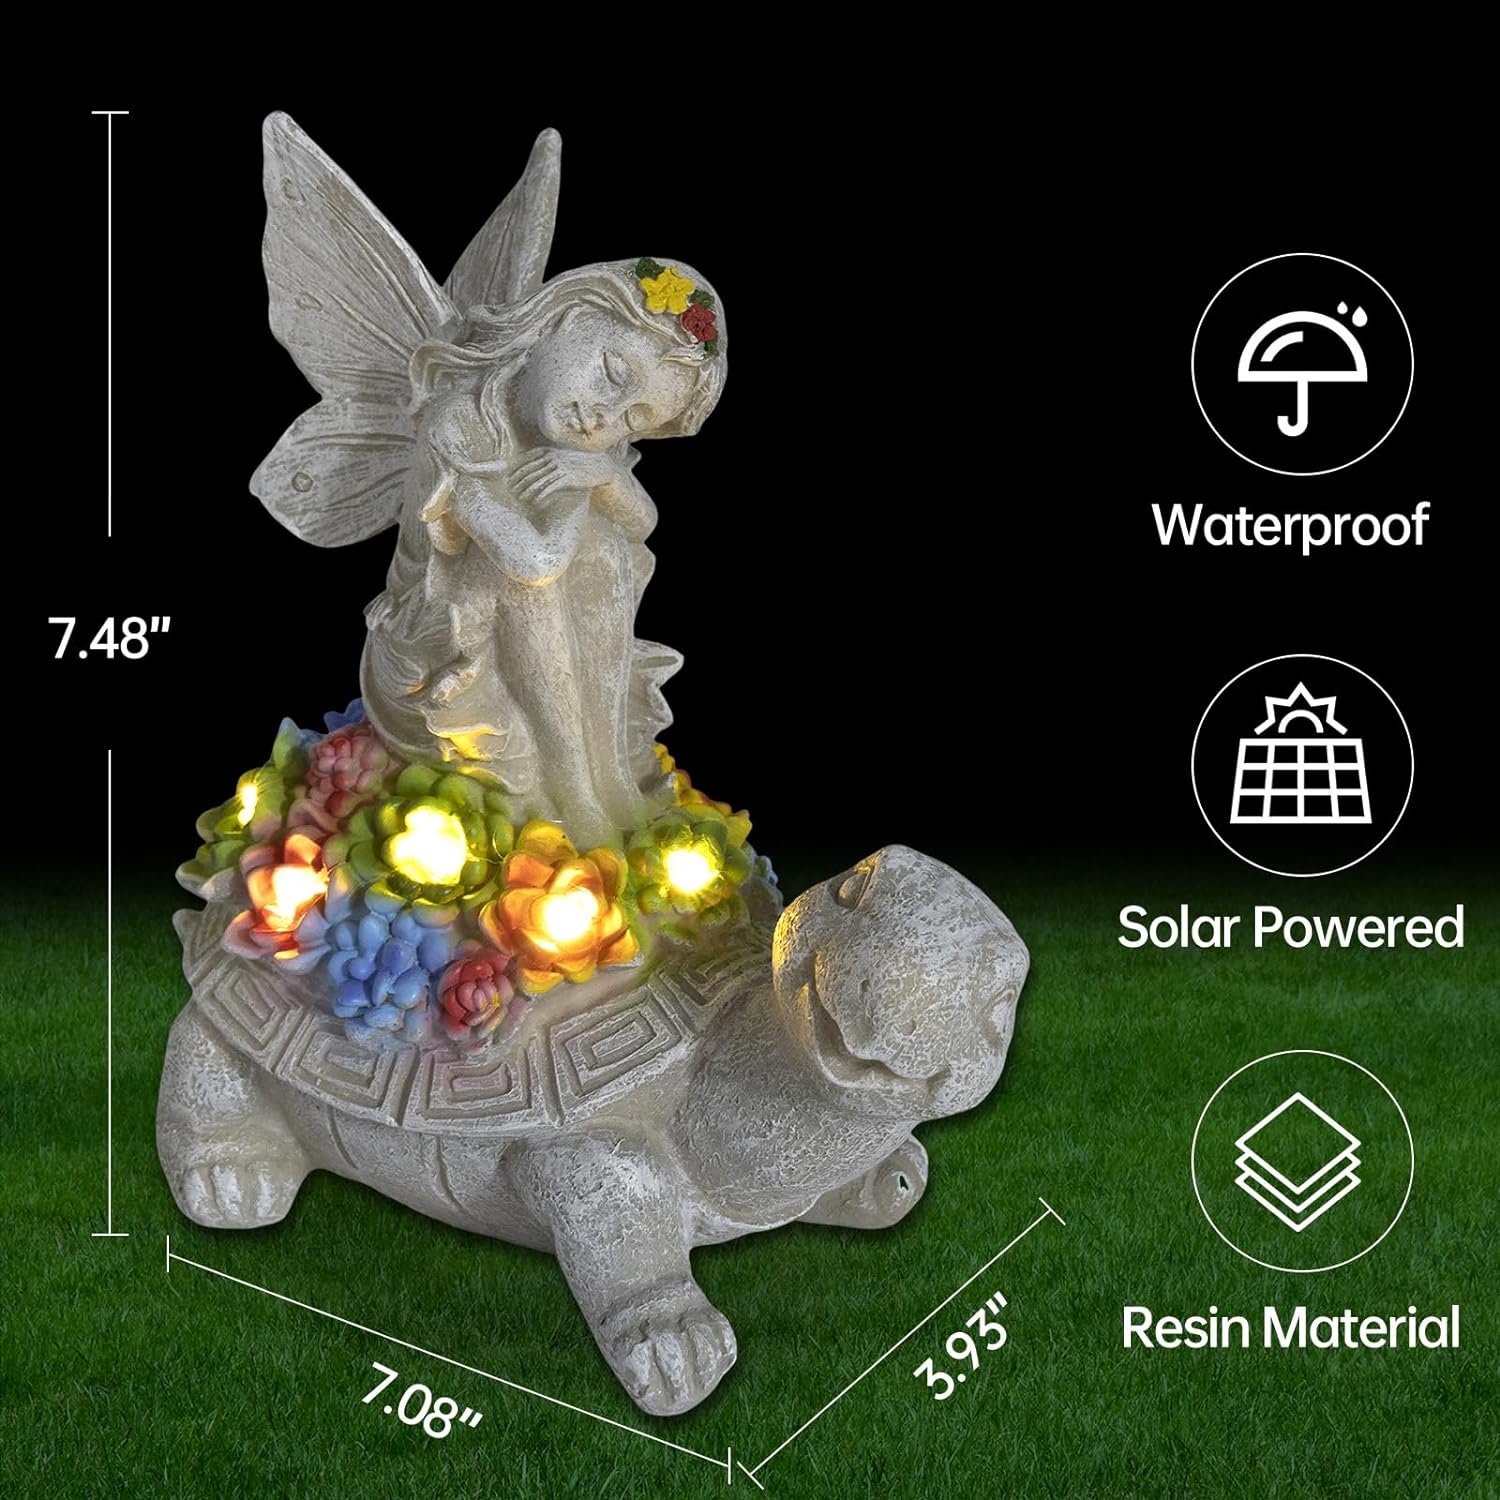 Turtle Garden Decor Solar Turtle Statues Outdoor with Fairy Angel Lights Lawn Tortoise for Patio, Balcony, Yard, Decorations with LED Lights Ornament Housewarming